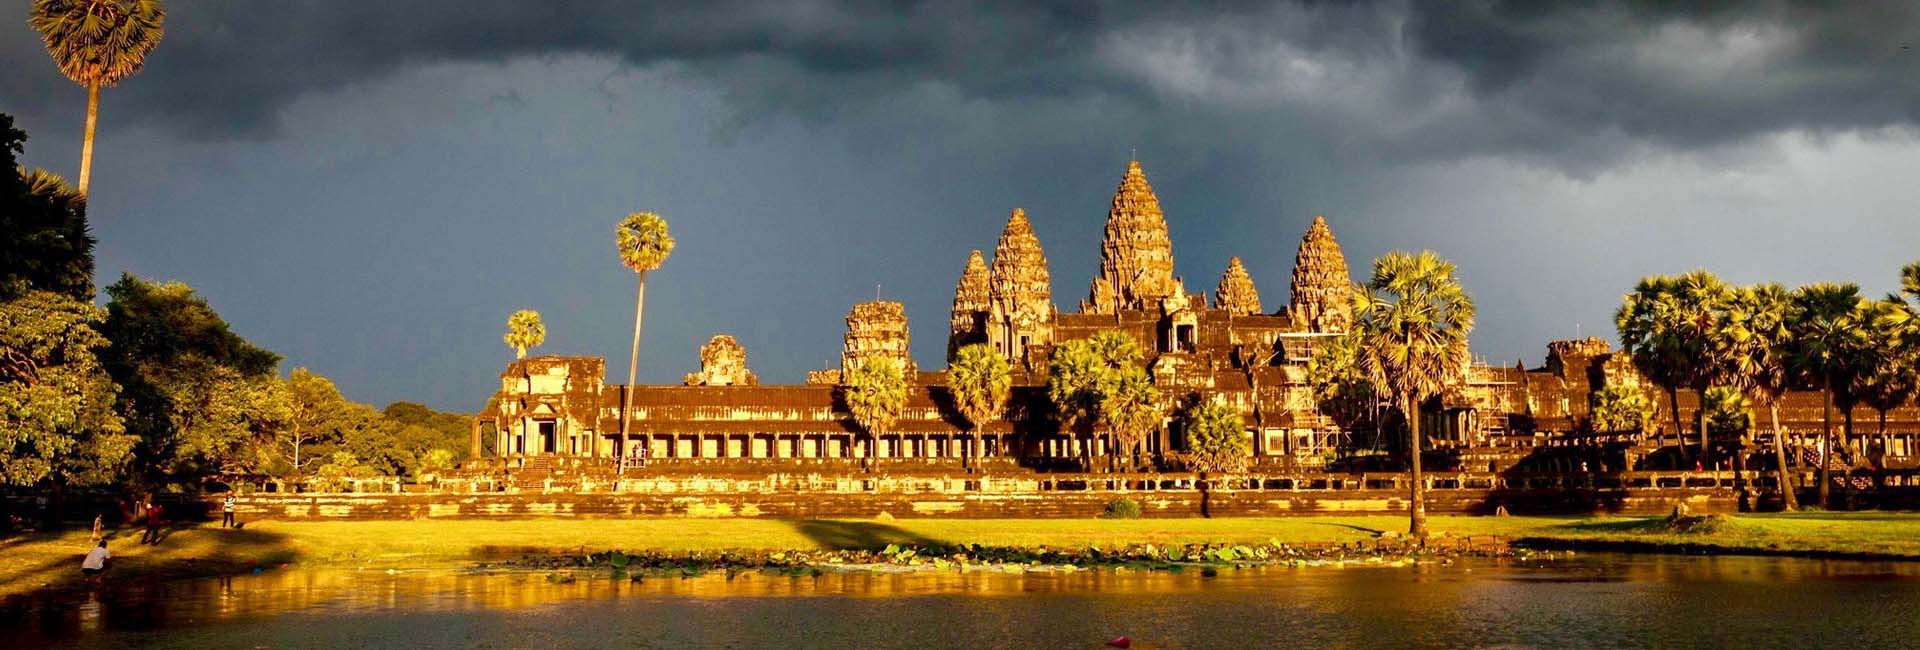 Cambodia Tour Packages: Angkor Wat